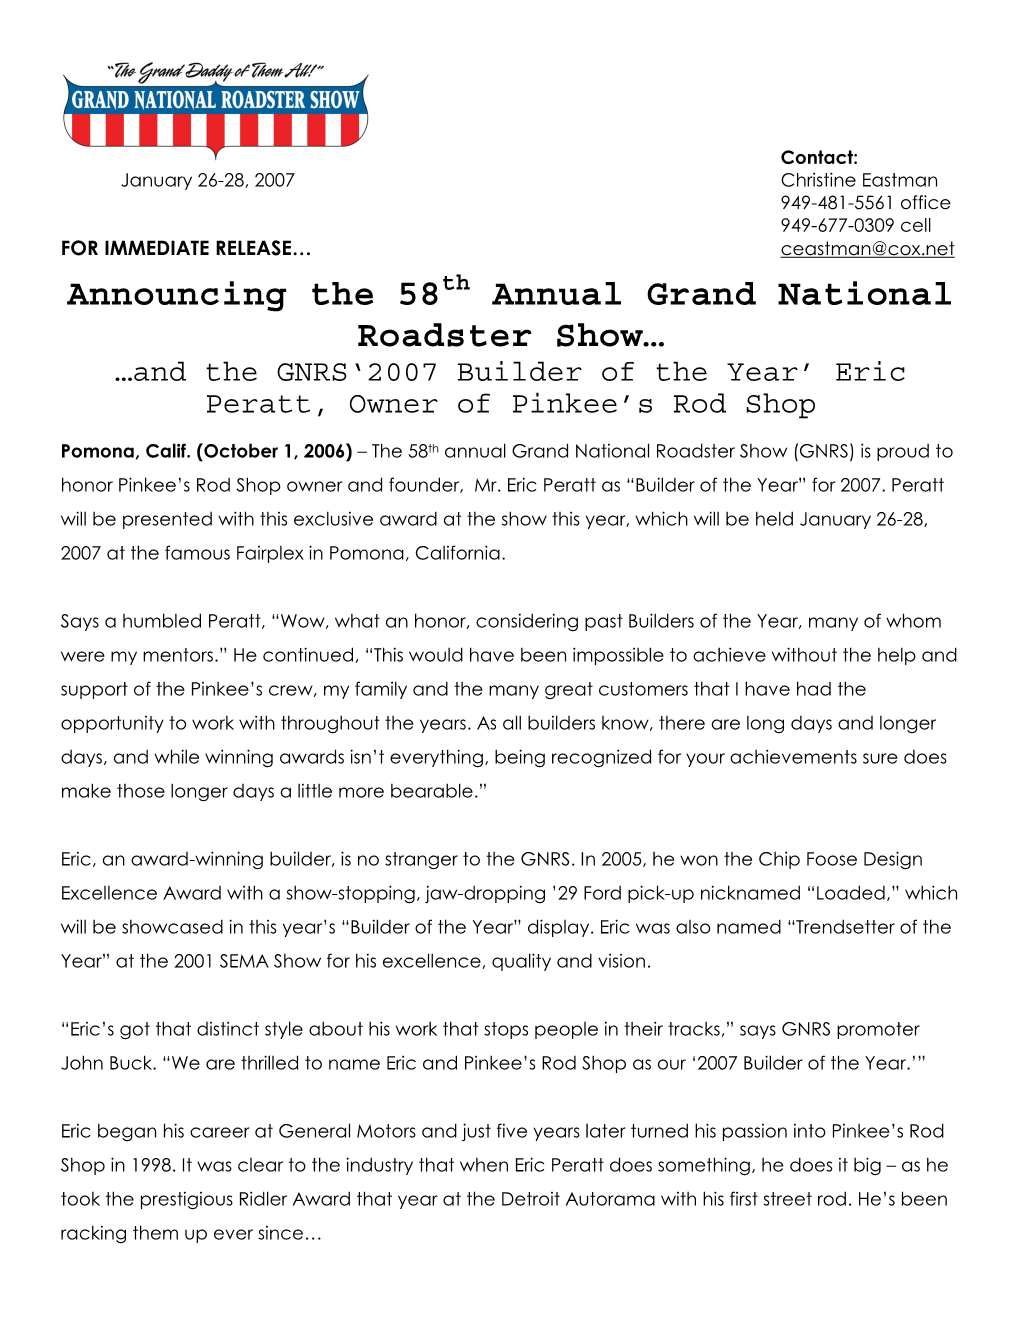 2007 Grand National Roadster Show Promises to Entertain Its Patrons with Sought-After Awards, Special Exhibits and Notable Personalities